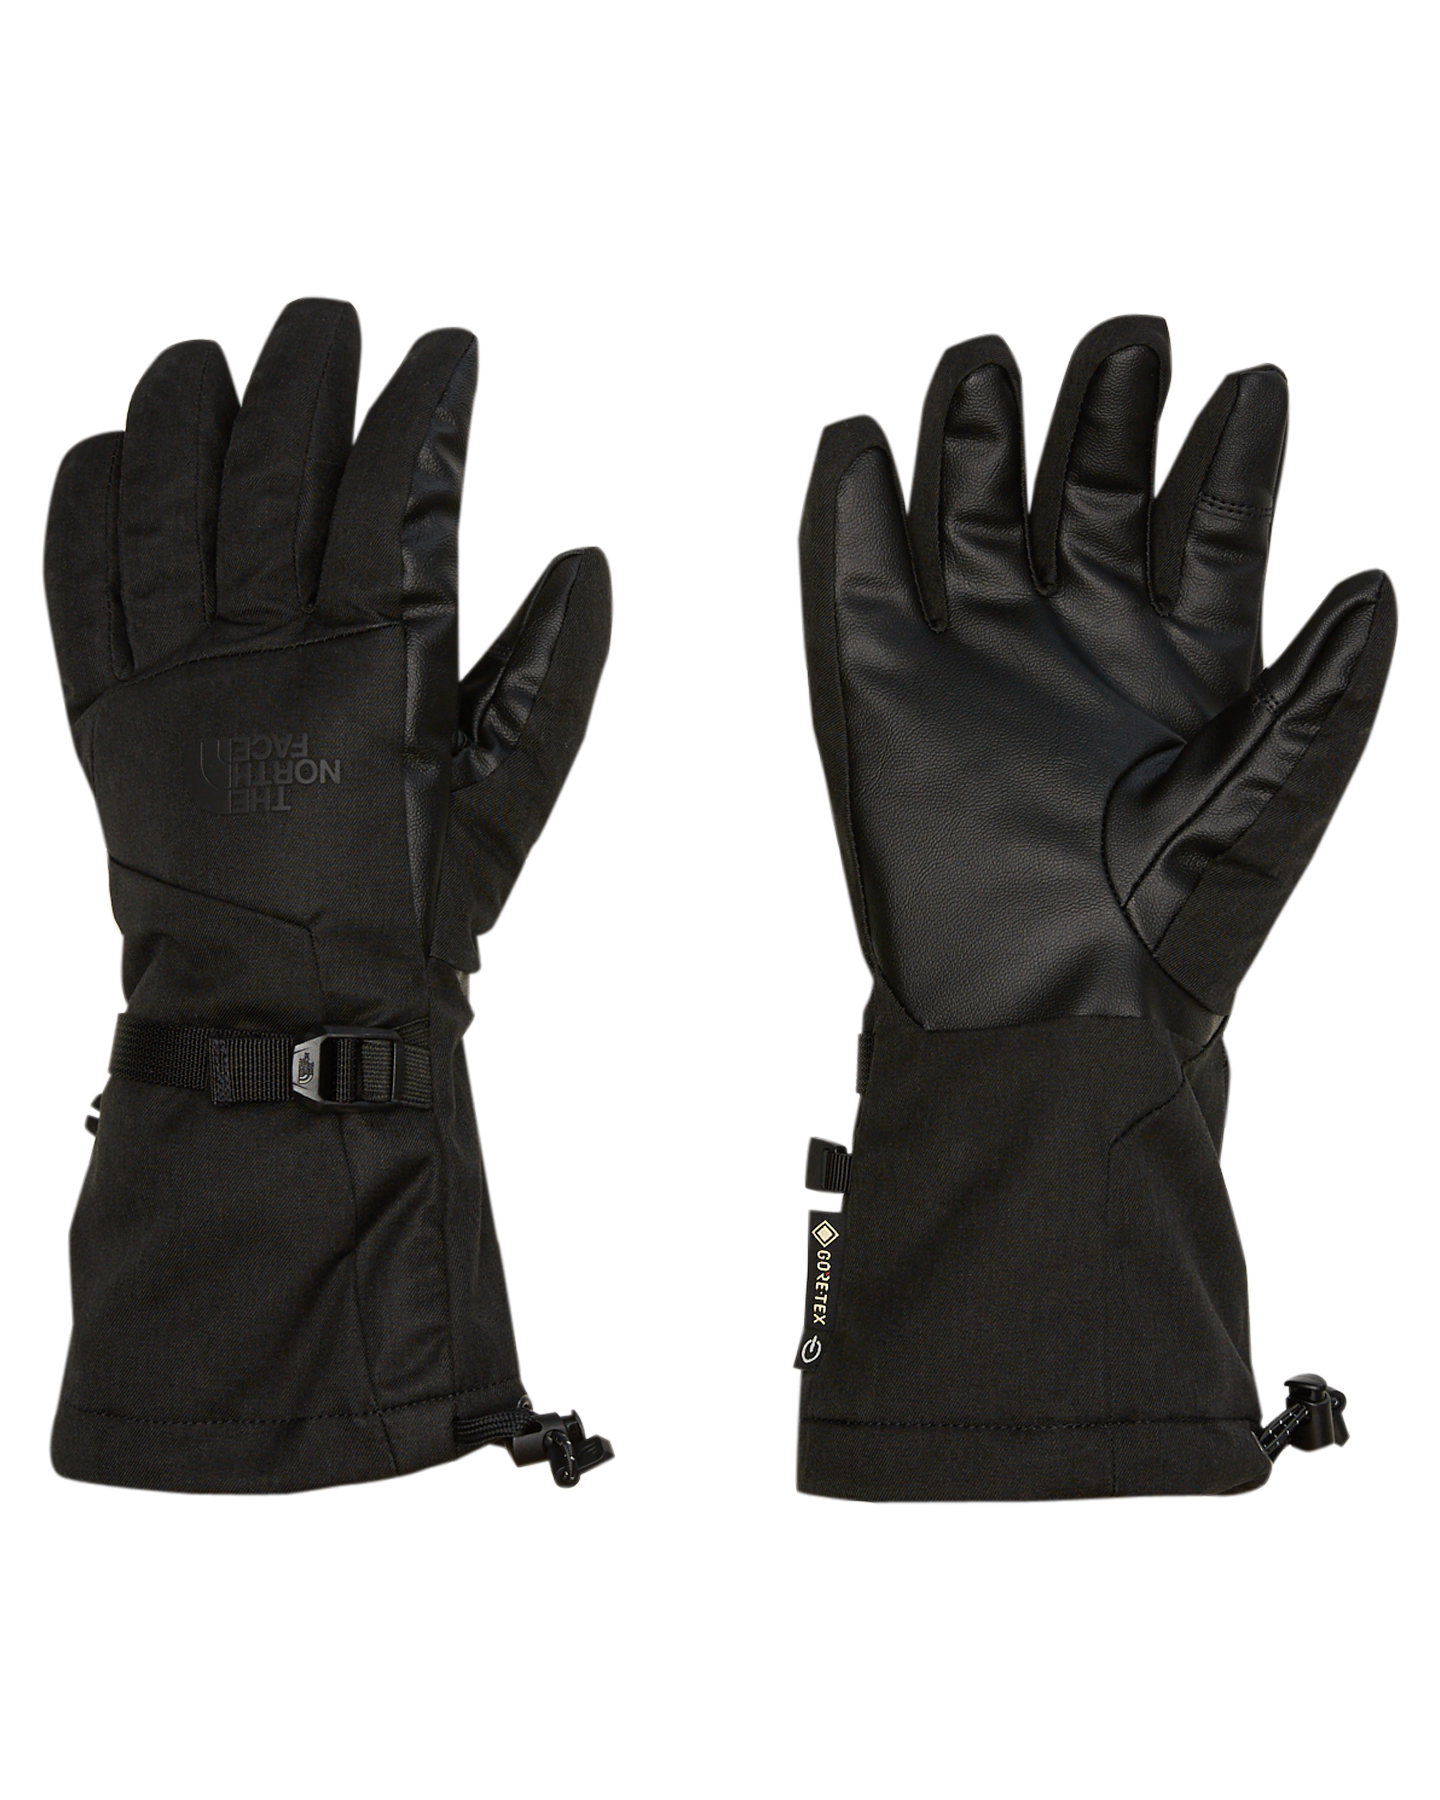 north face women's snow gloves